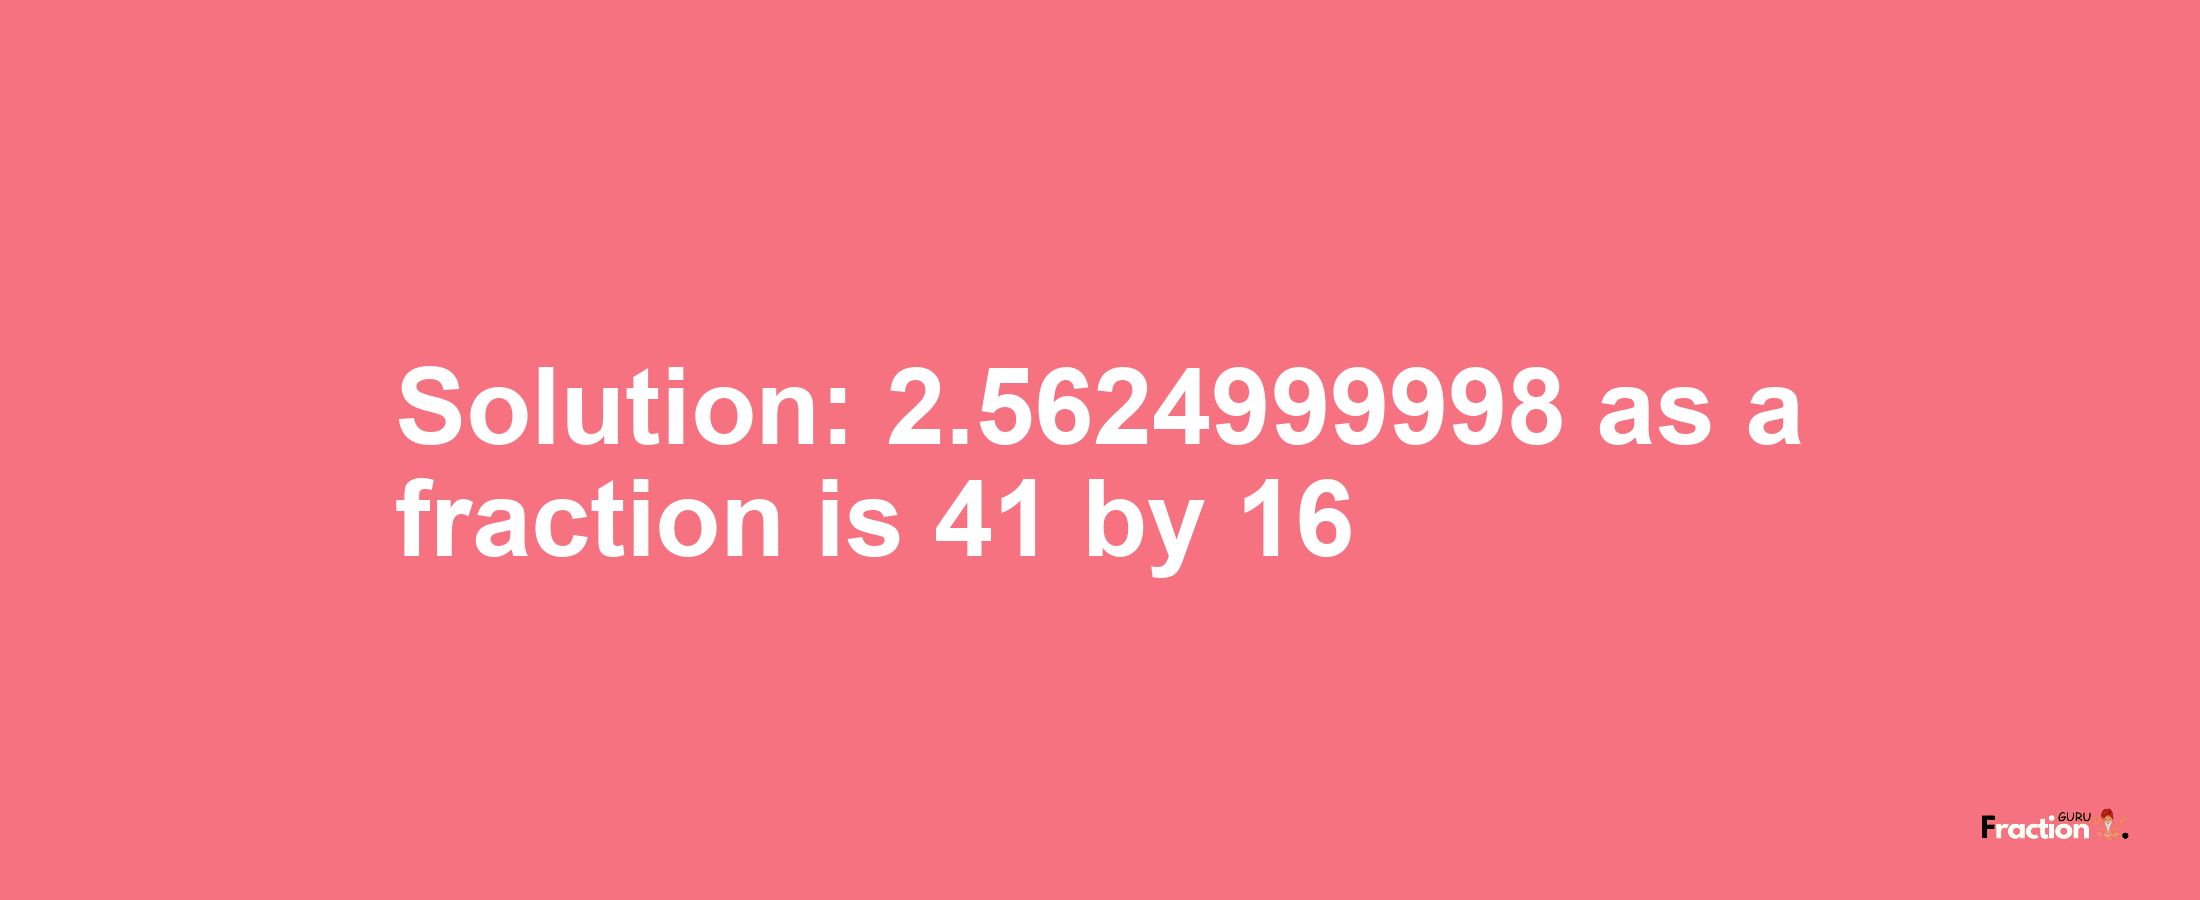 Solution:2.5624999998 as a fraction is 41/16